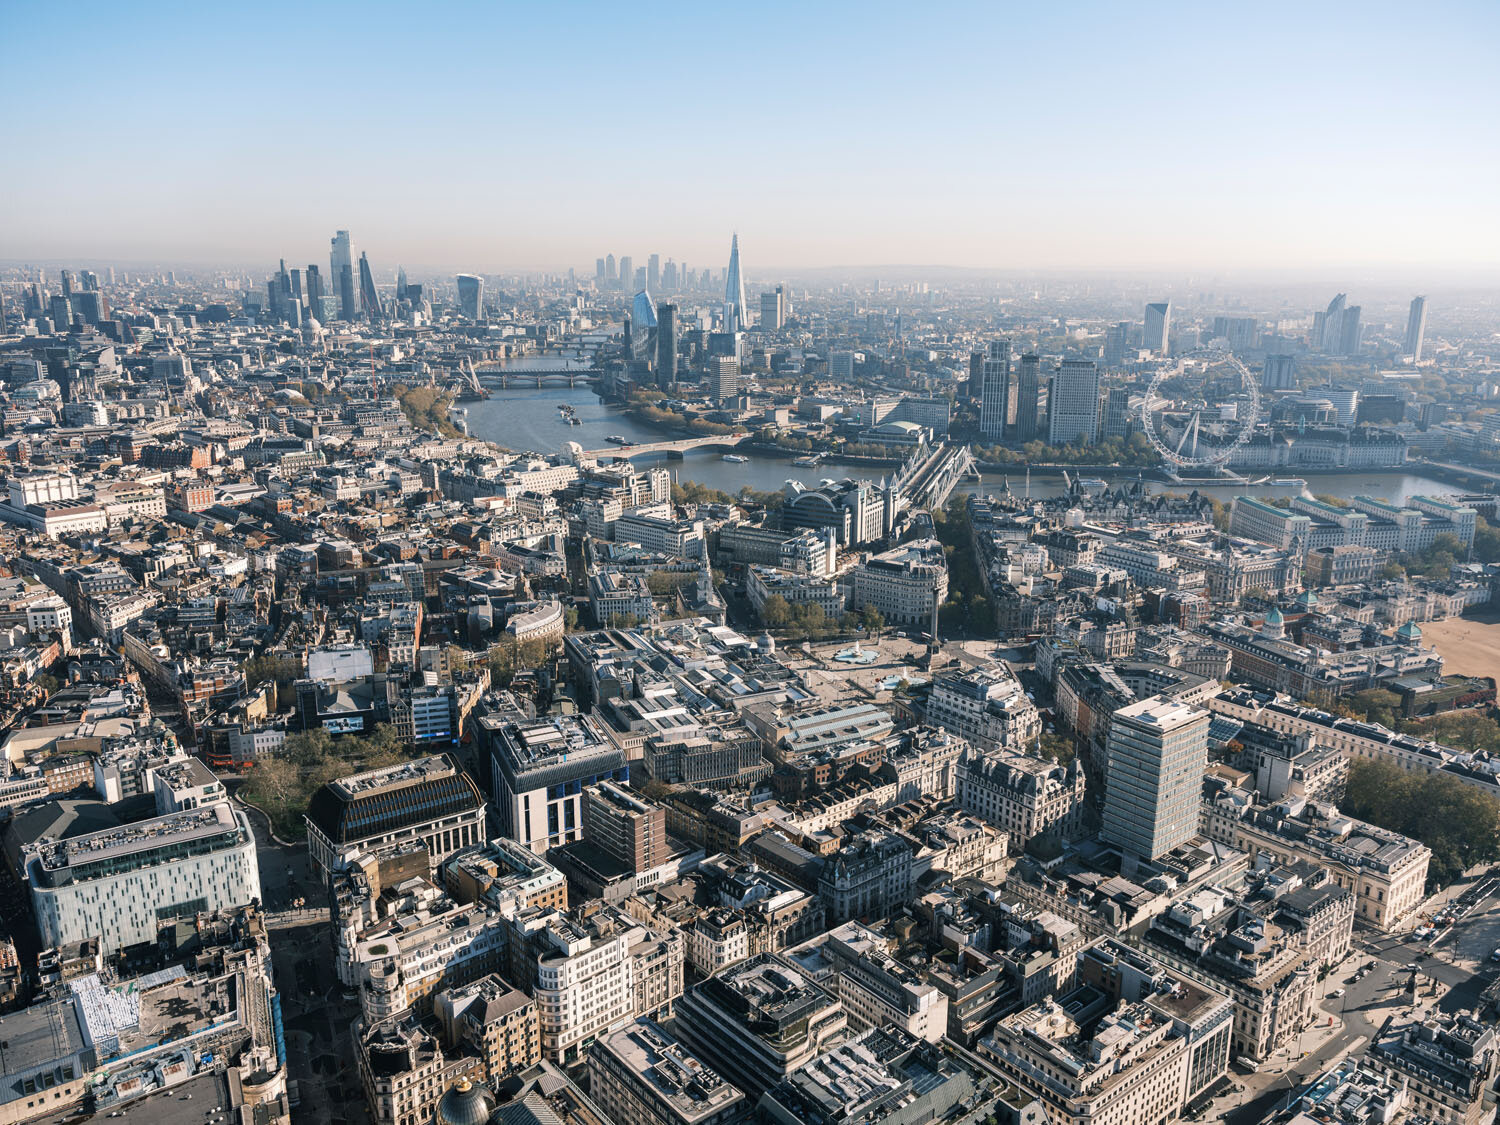  London Aerial View - West End towards South East 